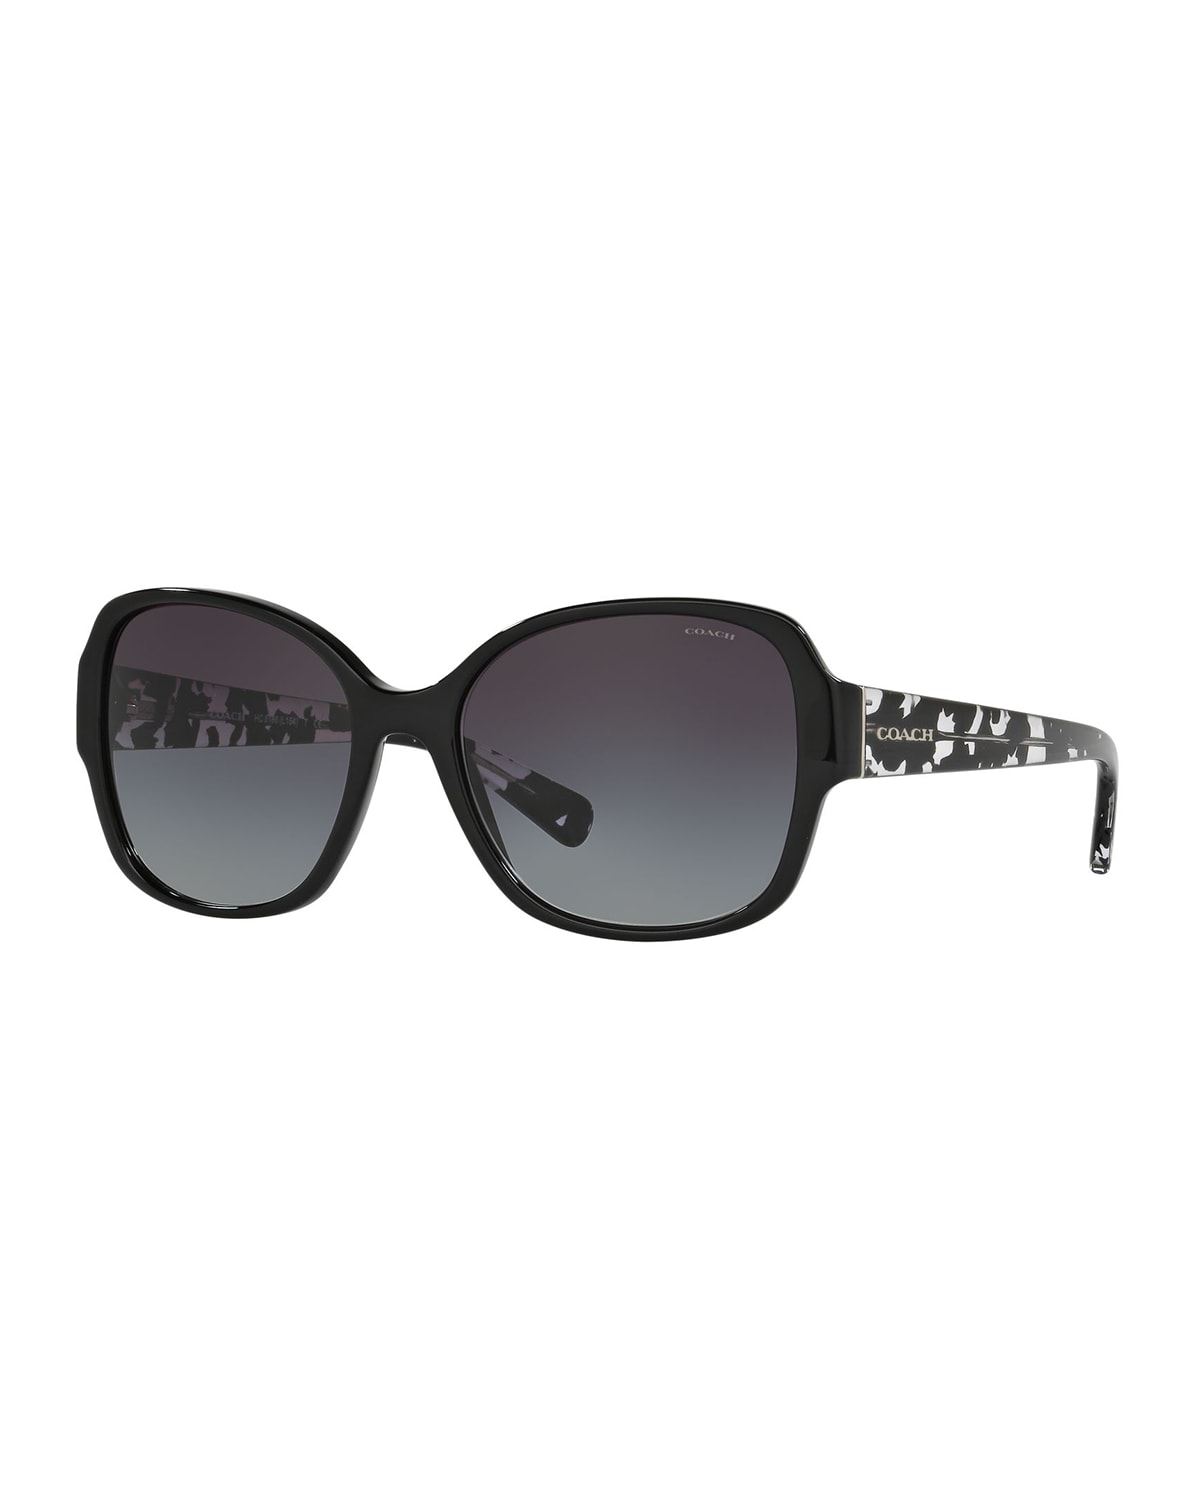 Coach Butterfly Sunglasses W/ Speckled Transparent Arms In Black